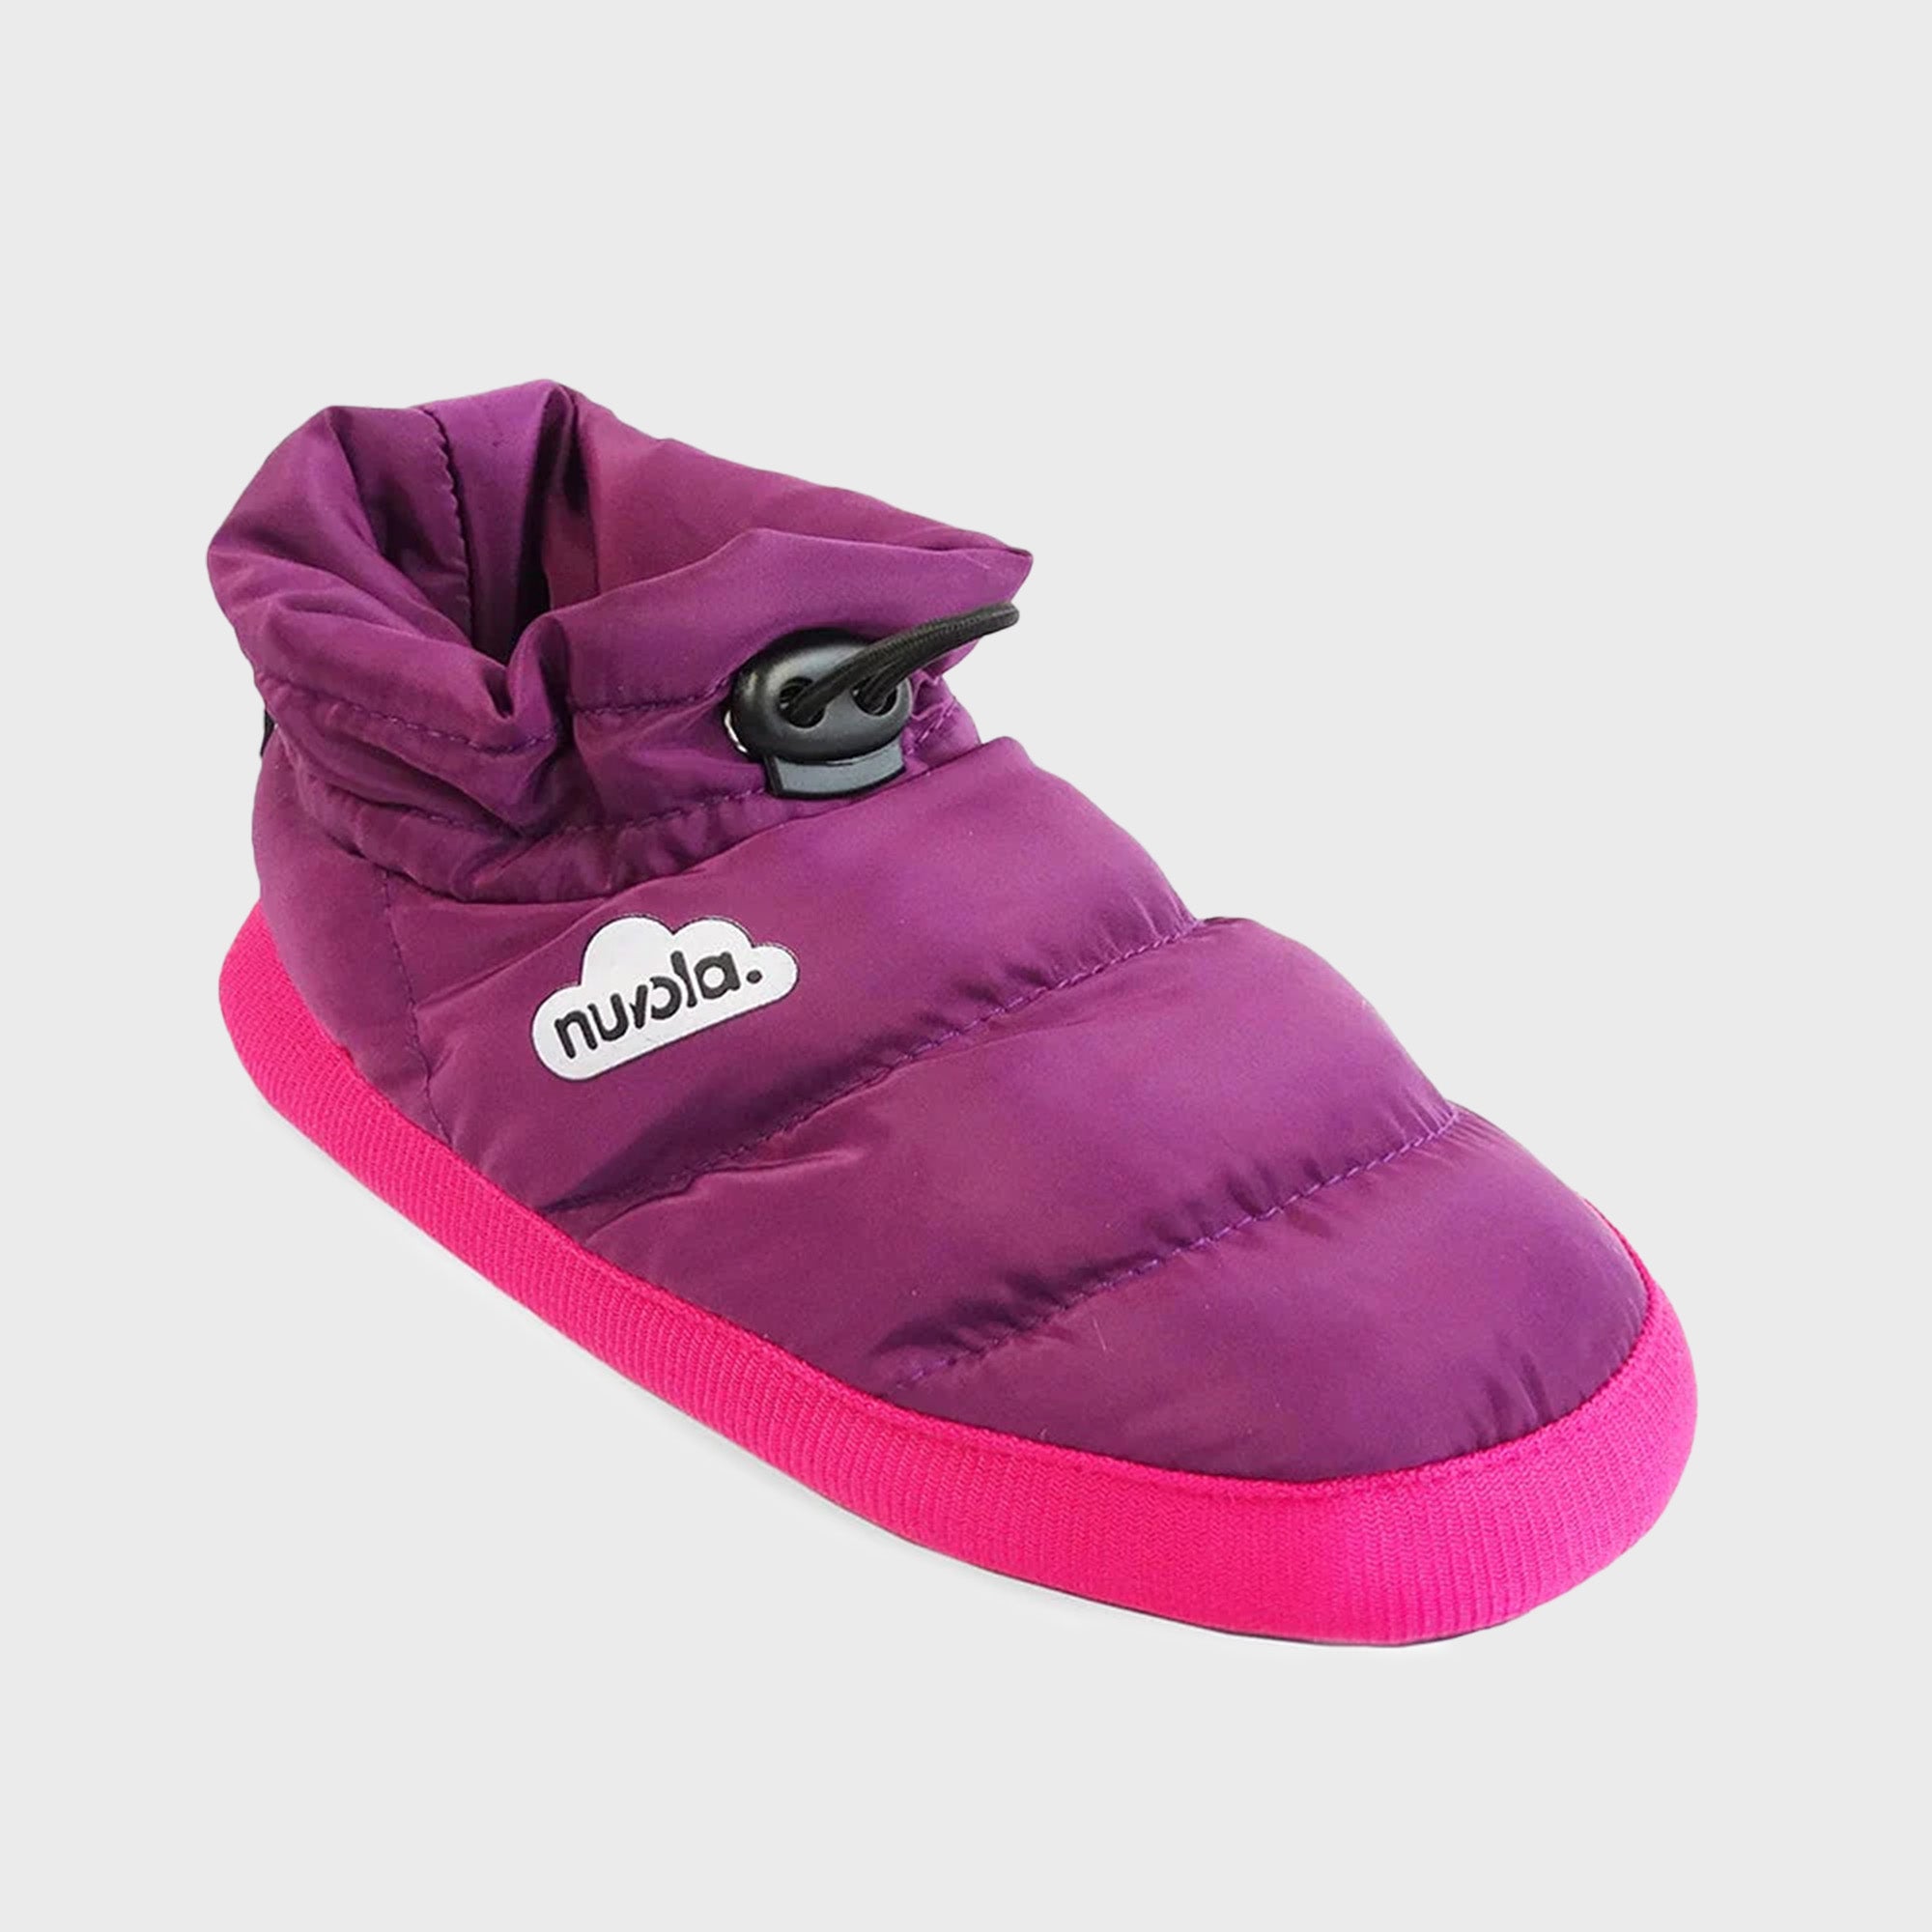 Nuvola Home Party Boots in Purple CNBHGPRTY21 FROM EIGHTYWINGOLD - OFFICIAL BRAND PARTNER